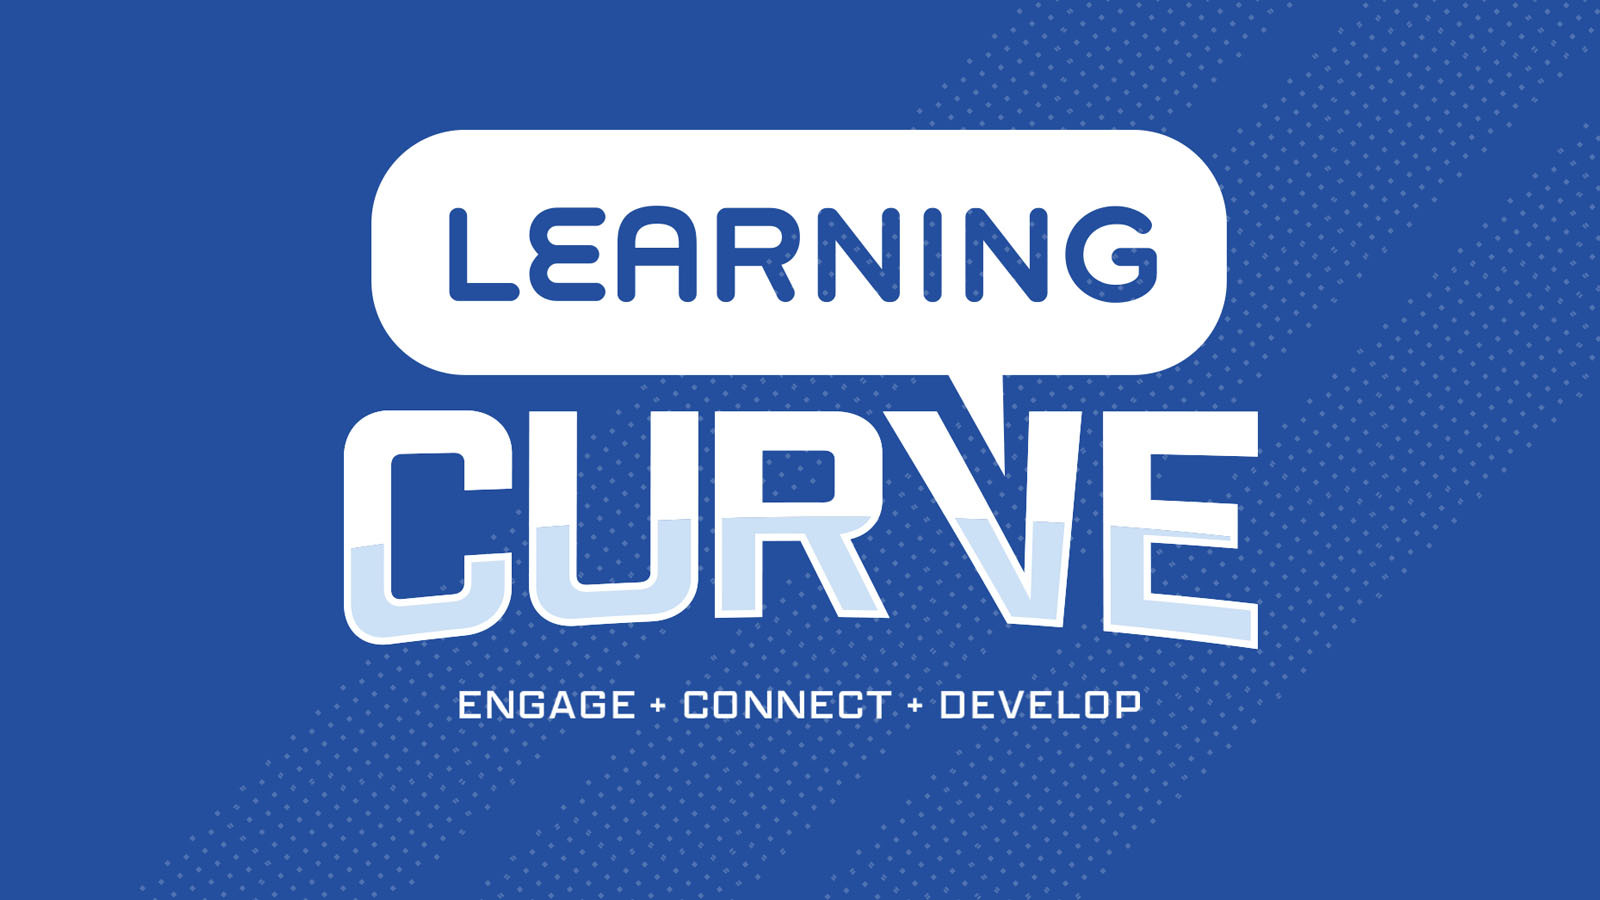 The logo for Learning Curve displays the name of the series against a blue backdrop with "engage + connect + develop" written underneath.